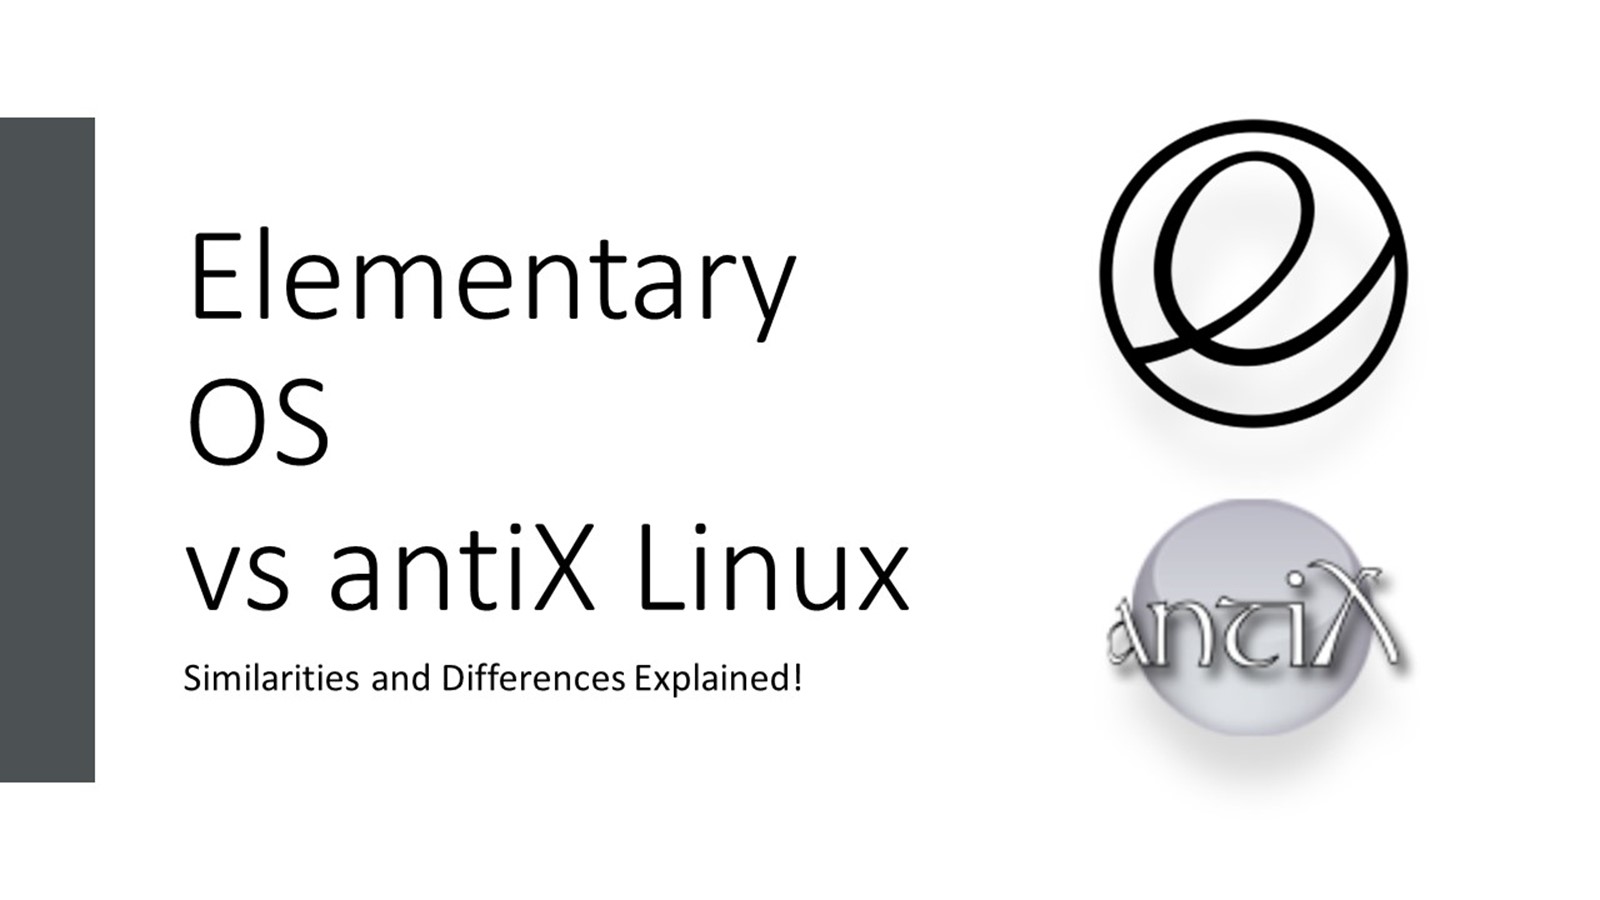 Elementary OS vs antiX: Similarities & Differences!